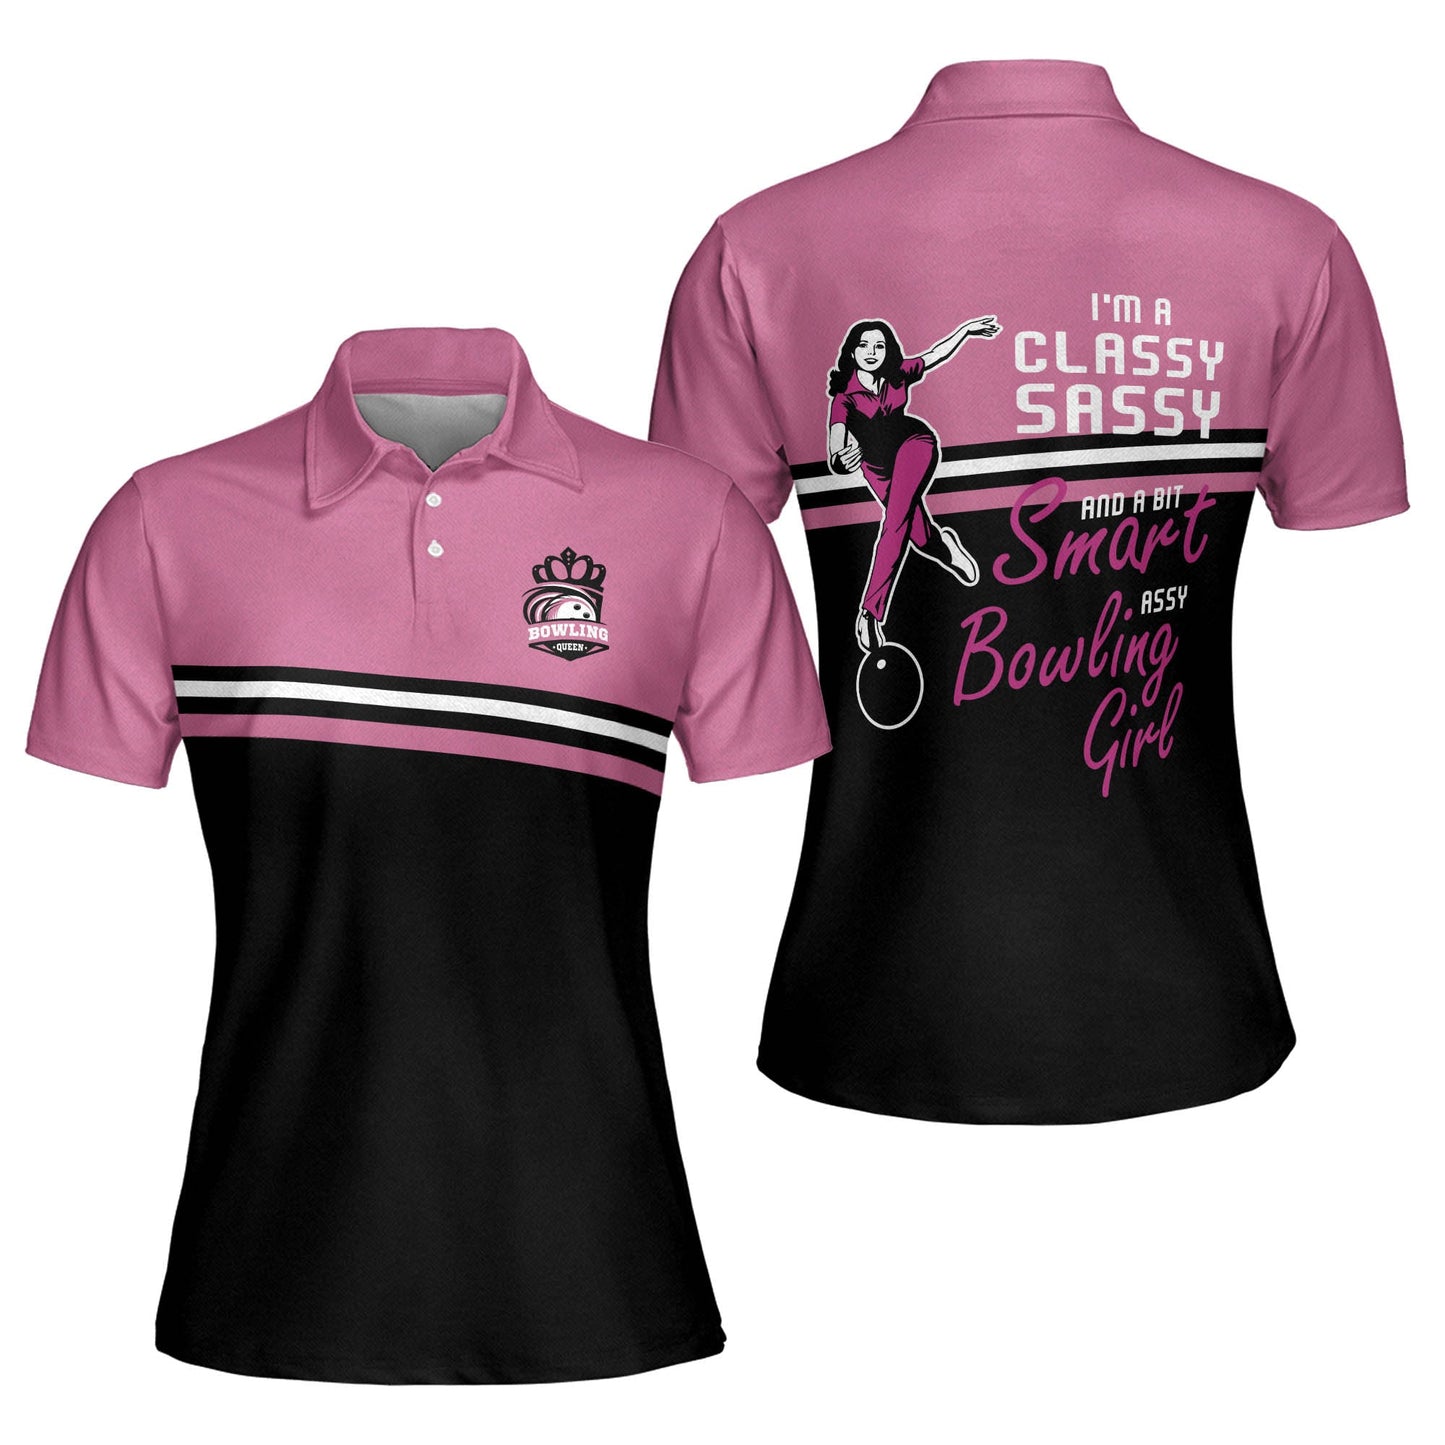 Custom Bowling Shirts For Women - Pink And Black Bowling Shirt Ladies - Bowling Polo Shirts Short Sleeve - I'm A Classy Sassy BW0011